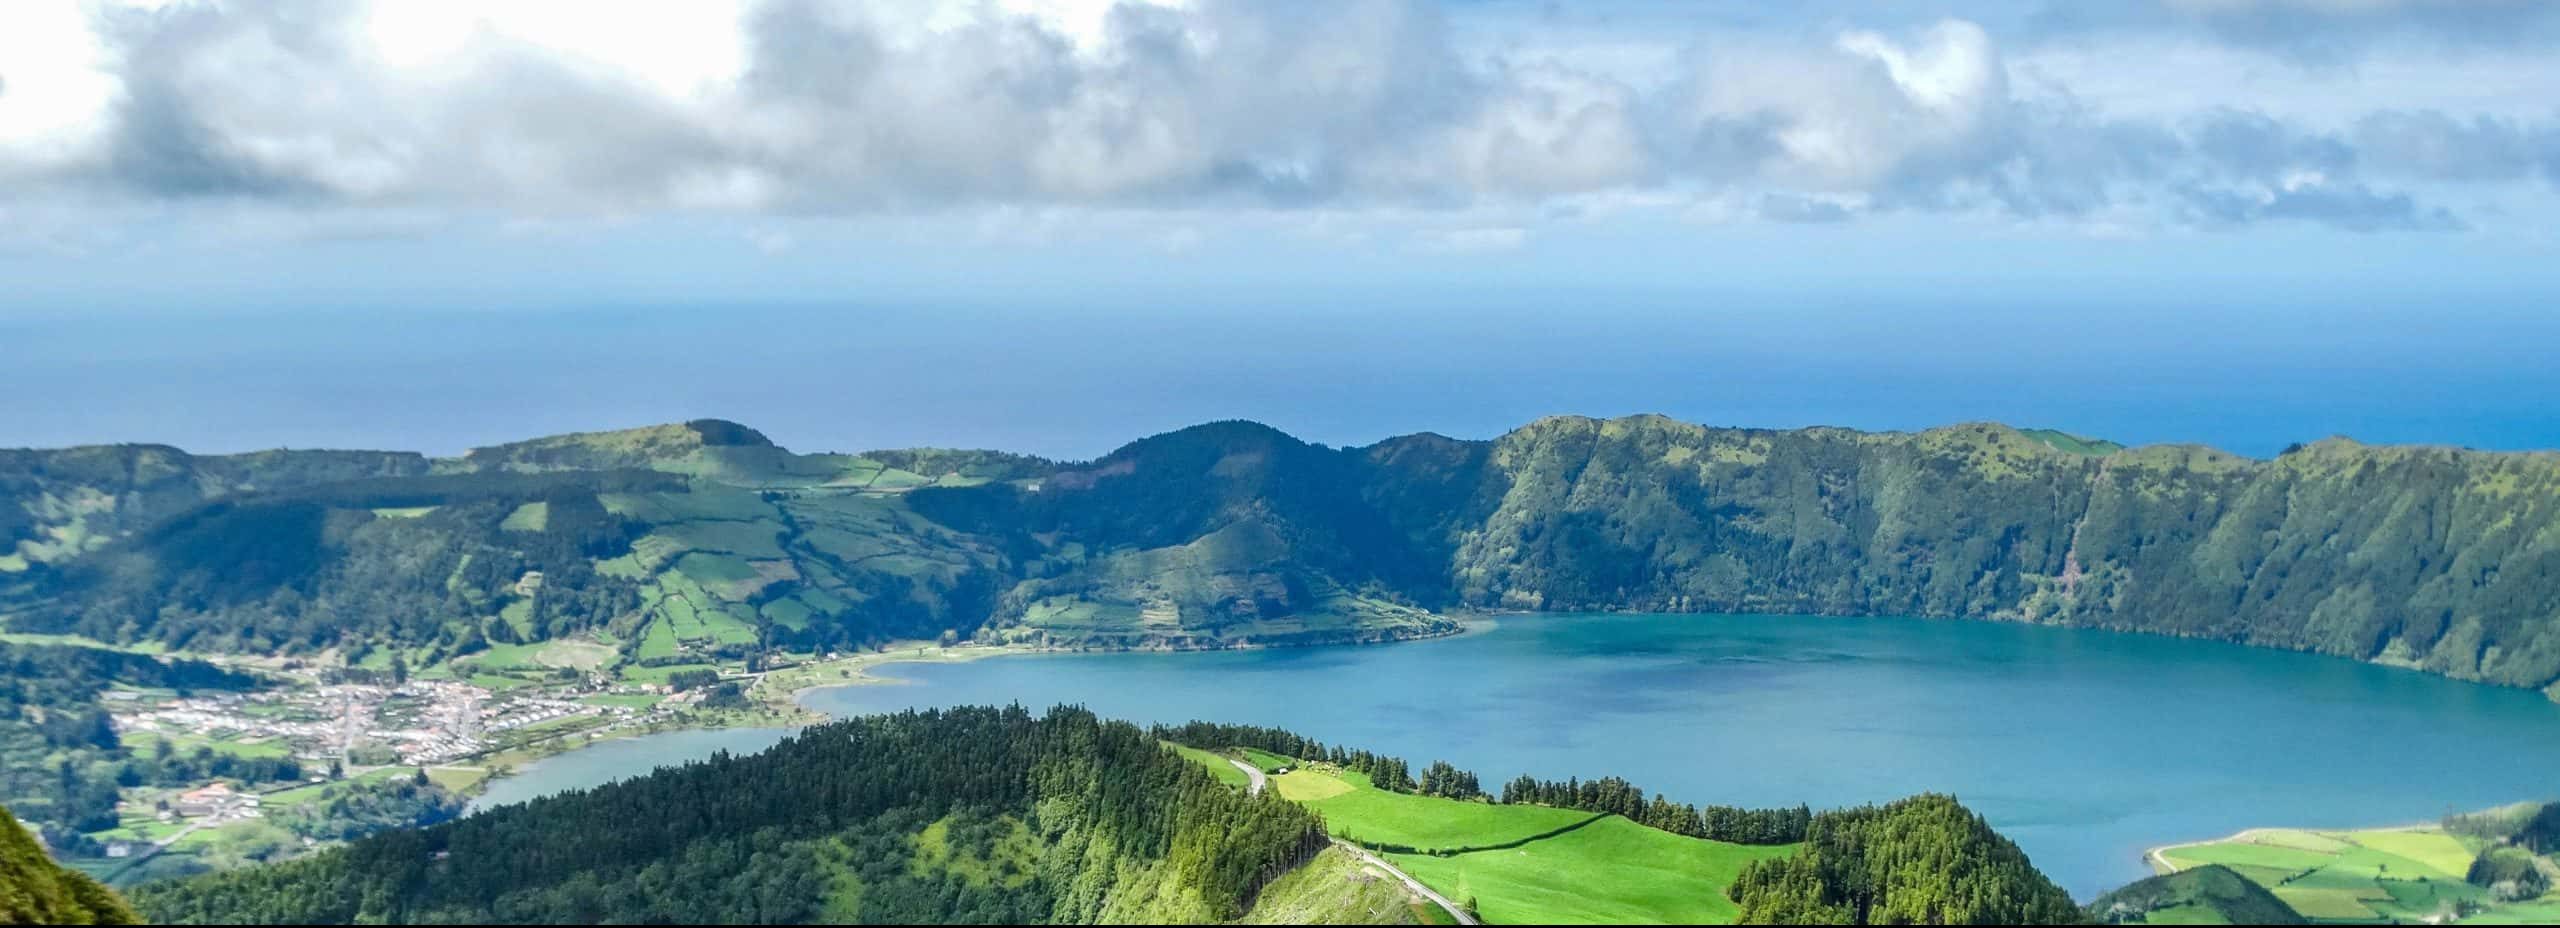 Azores Atlantic Ocean Voyage on Tall Ship Sailing Morgenster with Classic Sailing